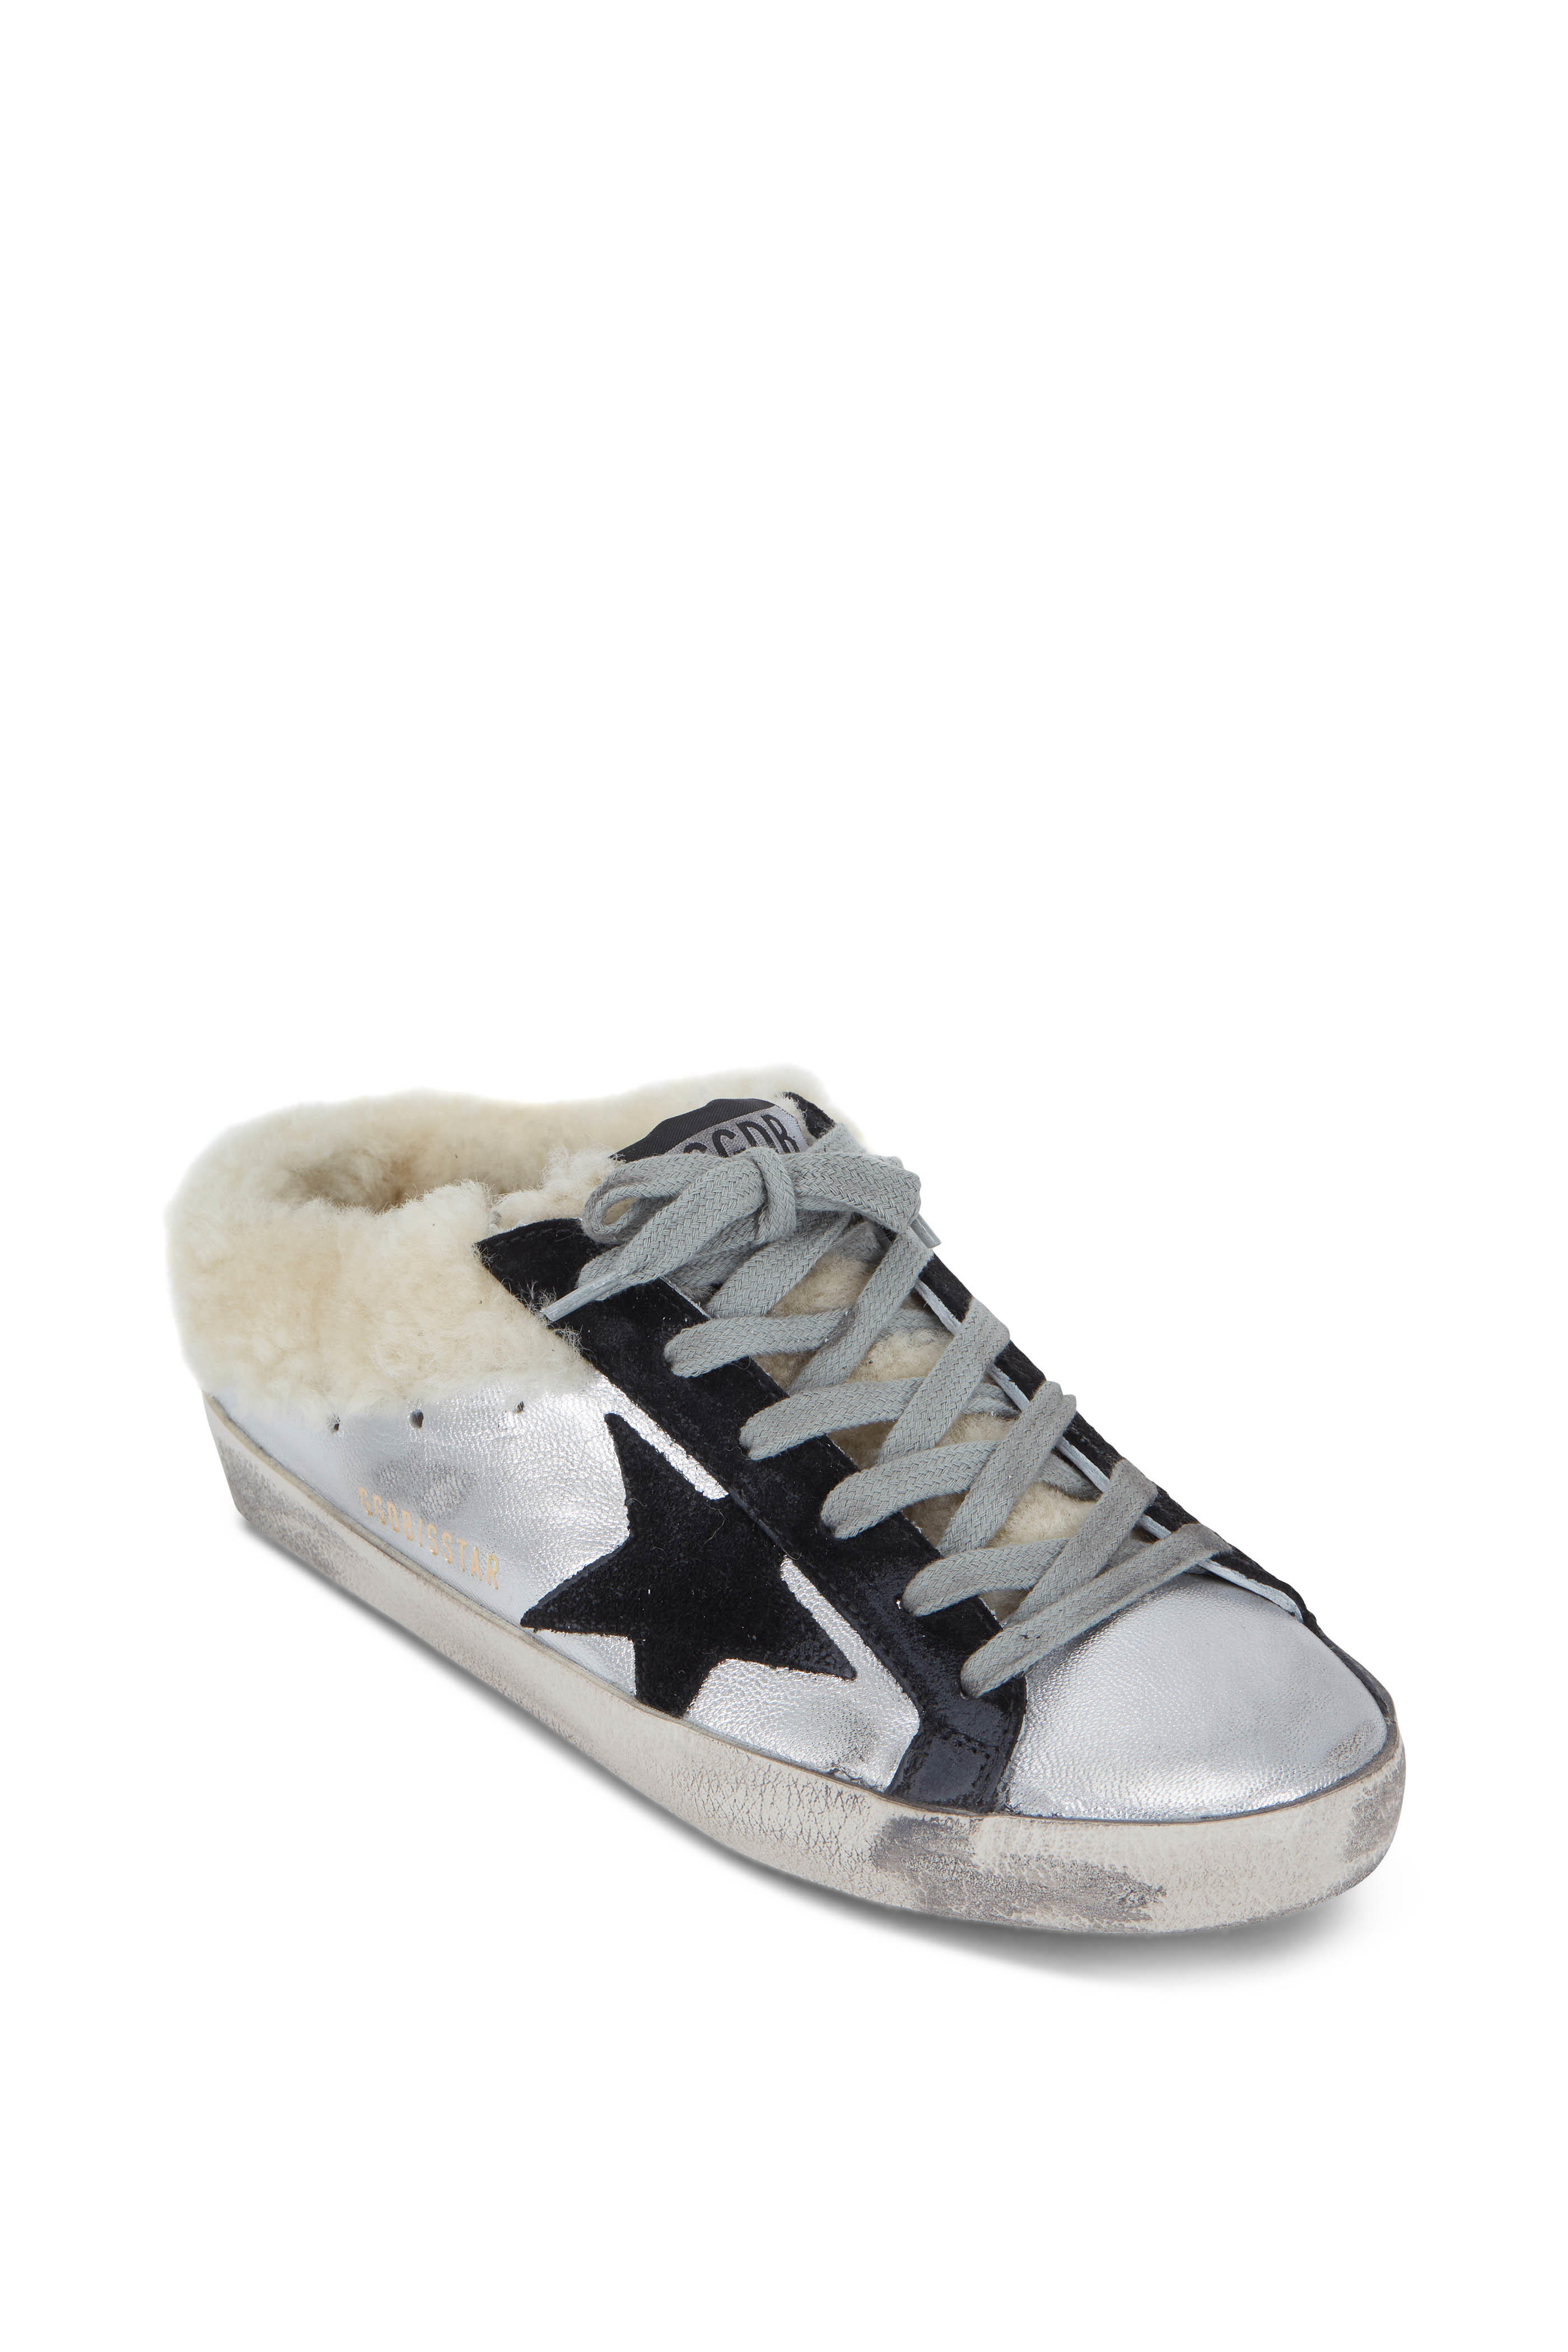 golden goose shearling lined